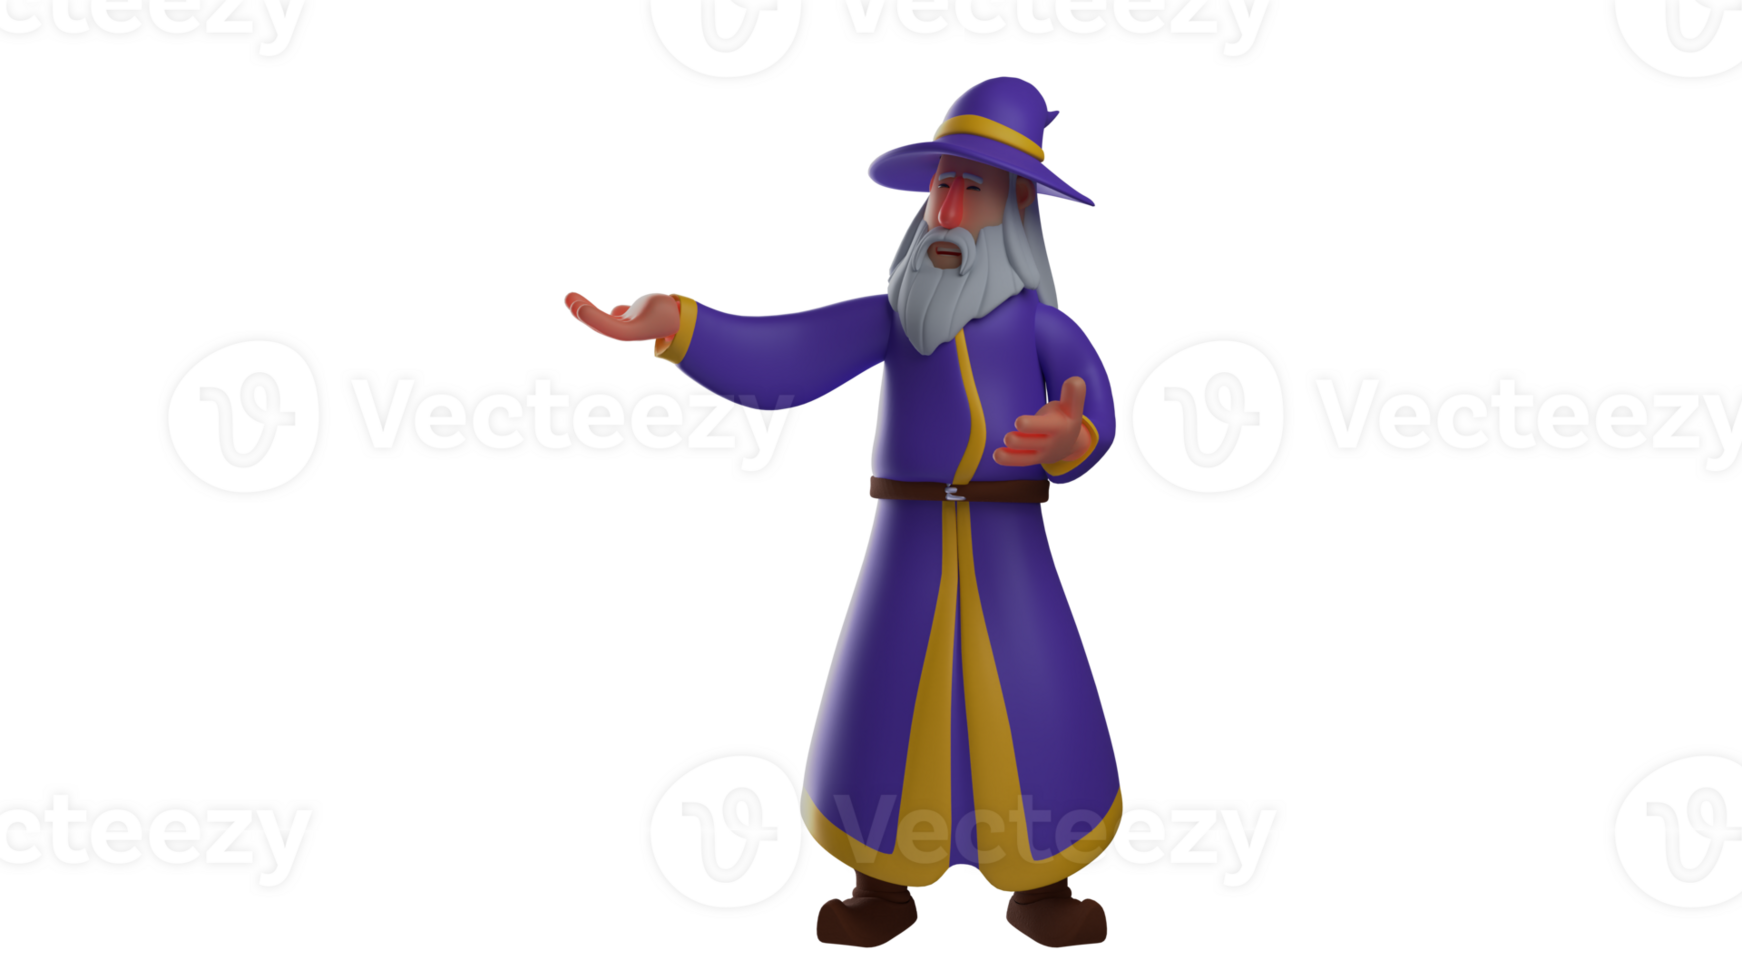 3D illustration. Old Man 3D cartoon character. Old man wear purple robes and wide hats. The old man was asking for an explanation from someone he met. Fierce old witch. 3D cartoon character png